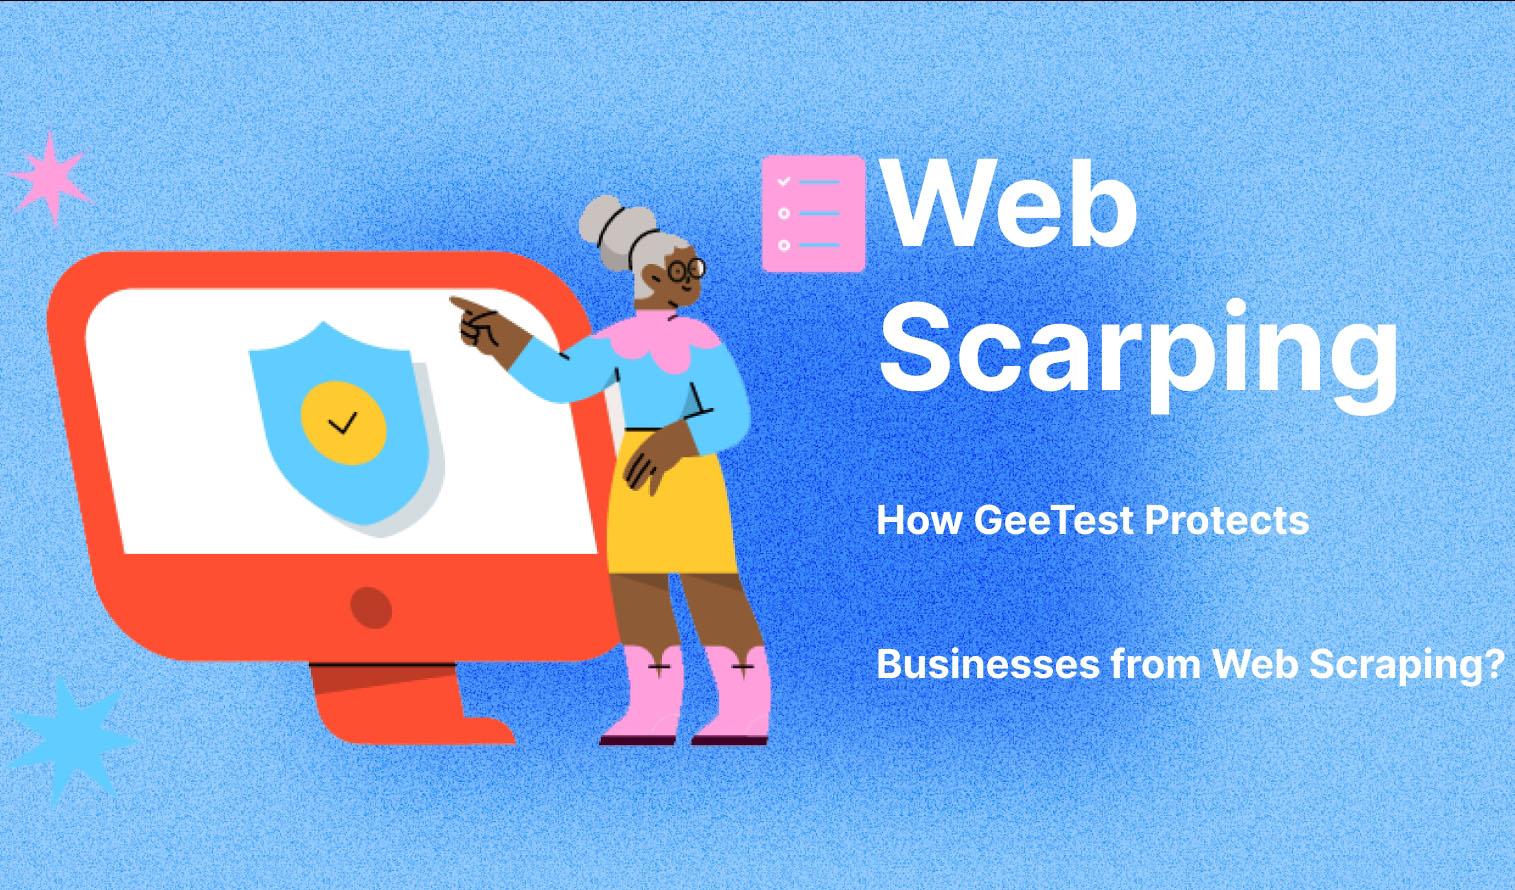 GeeTest's solutions are highly customizable and can be tailored to fit the specific needs of any business, making it an ideal choice for businesses of all sizes and industries looking to defend against web scraping.